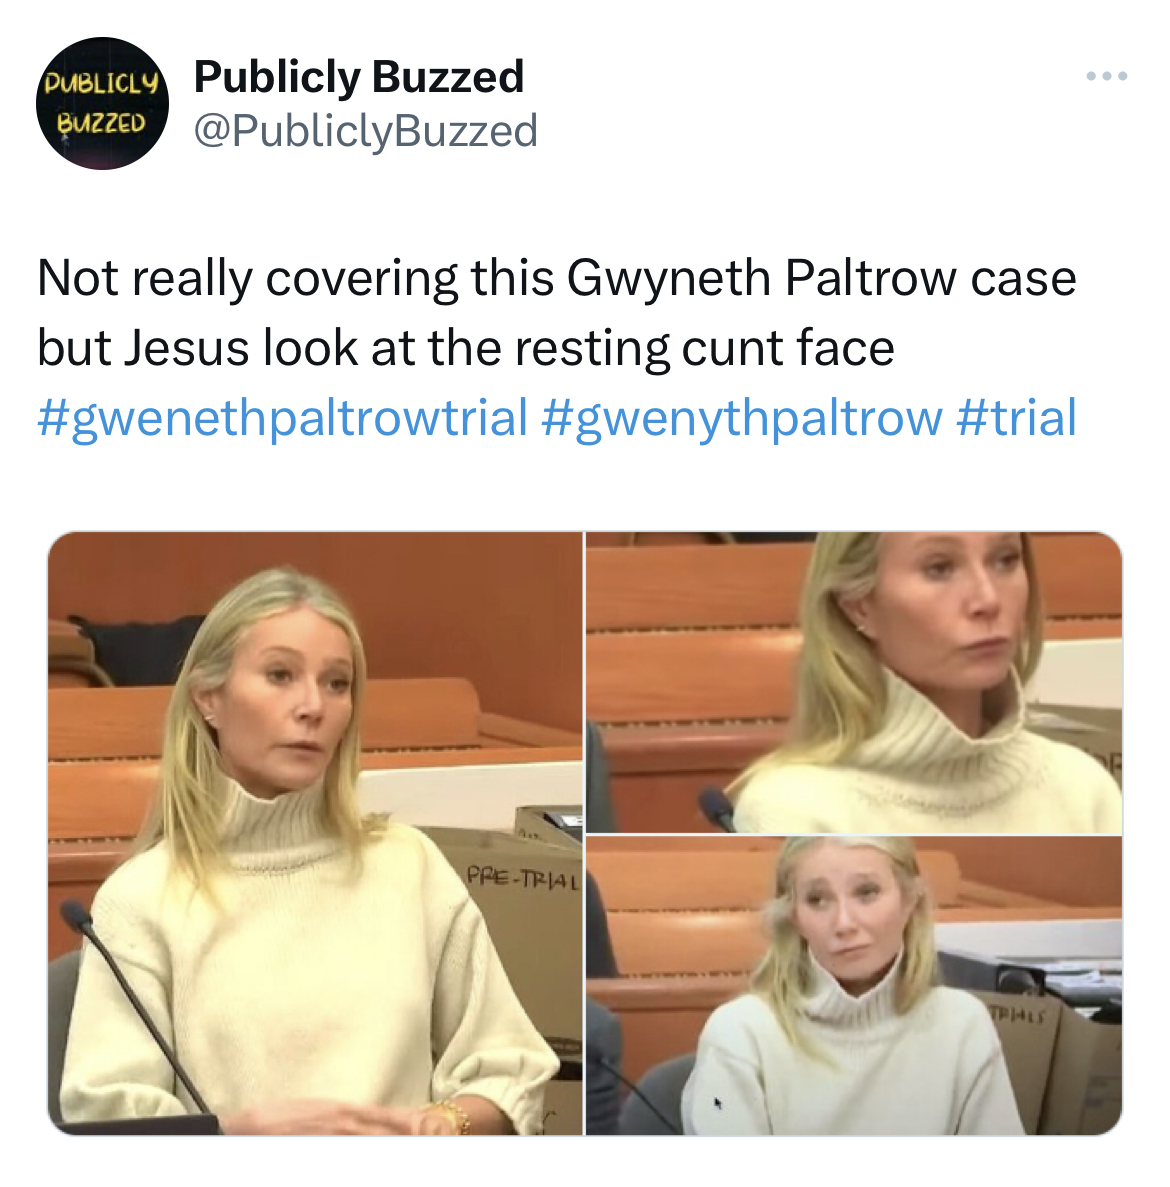 Gwyneth Paltrow Jeffrey Dahmer memes - facial expression - Publicly Publicly Buzzed Buzzed Not really covering this Gwyneth Paltrow case but Jesus look at the resting cunt face PreTrial